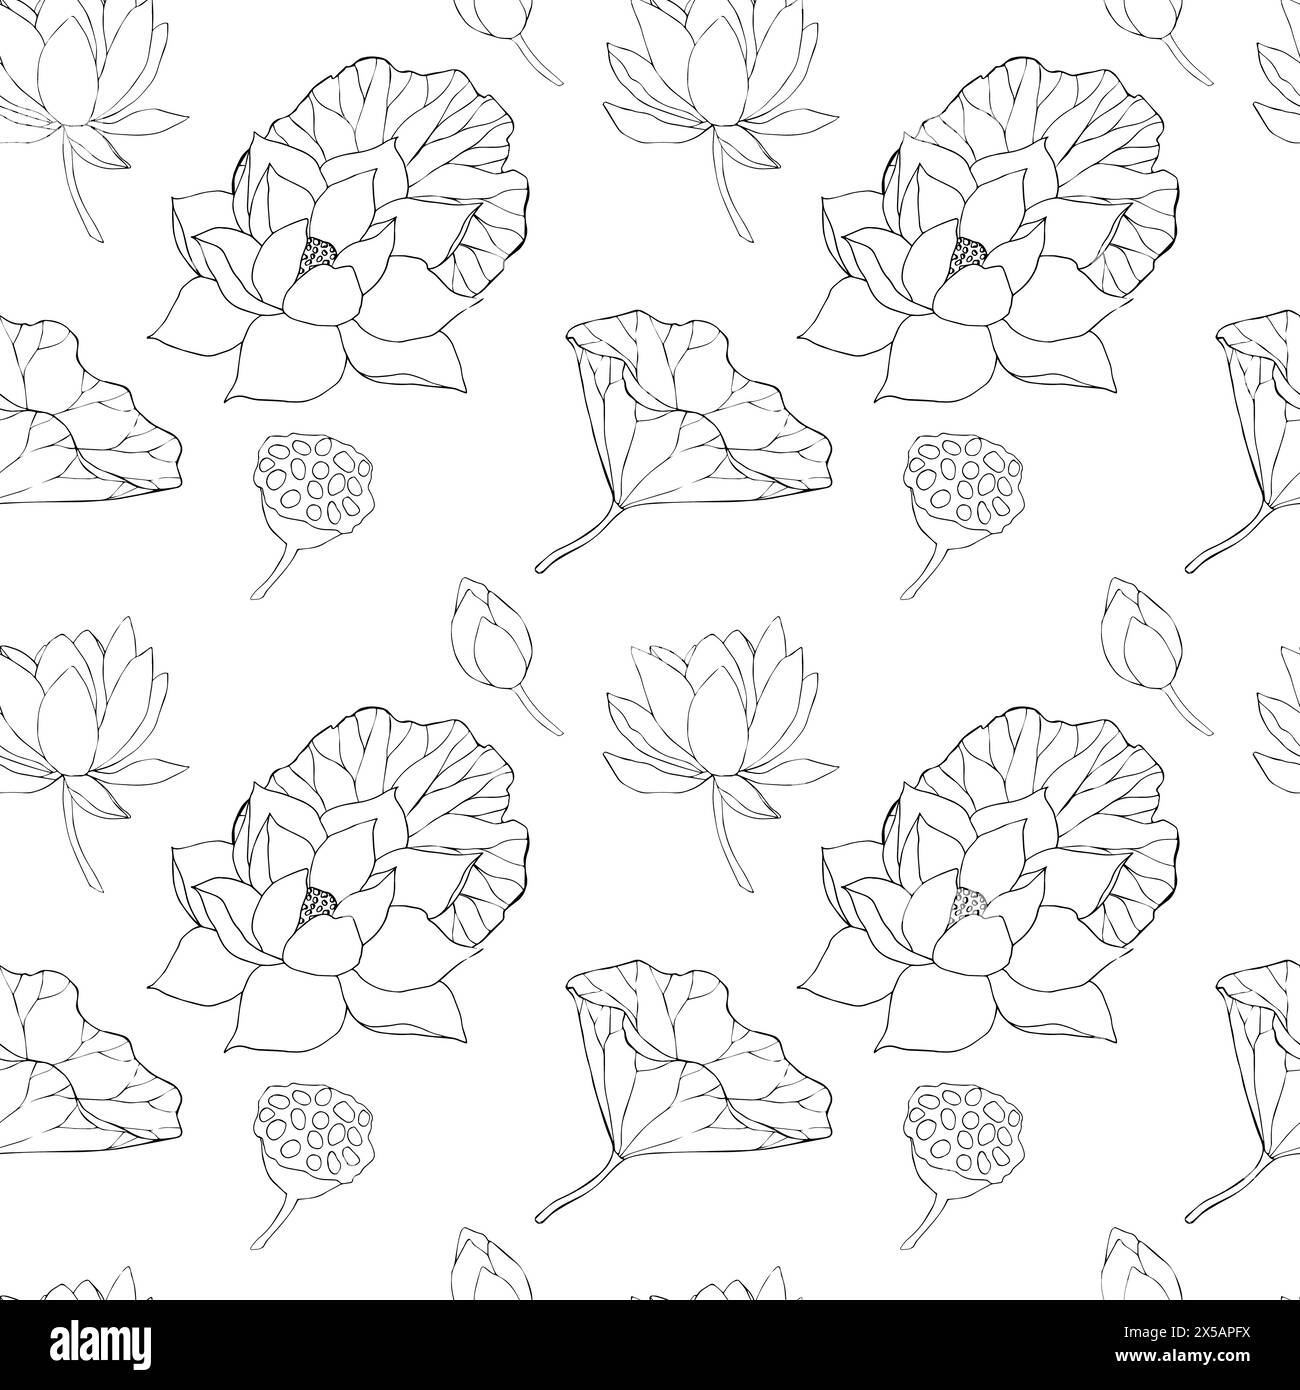 Seamless pattern with lotus flowers, leaves and buds black. Vector line illustration. Outline floral drawing for for logo, tattoo, packaging design Stock Vector